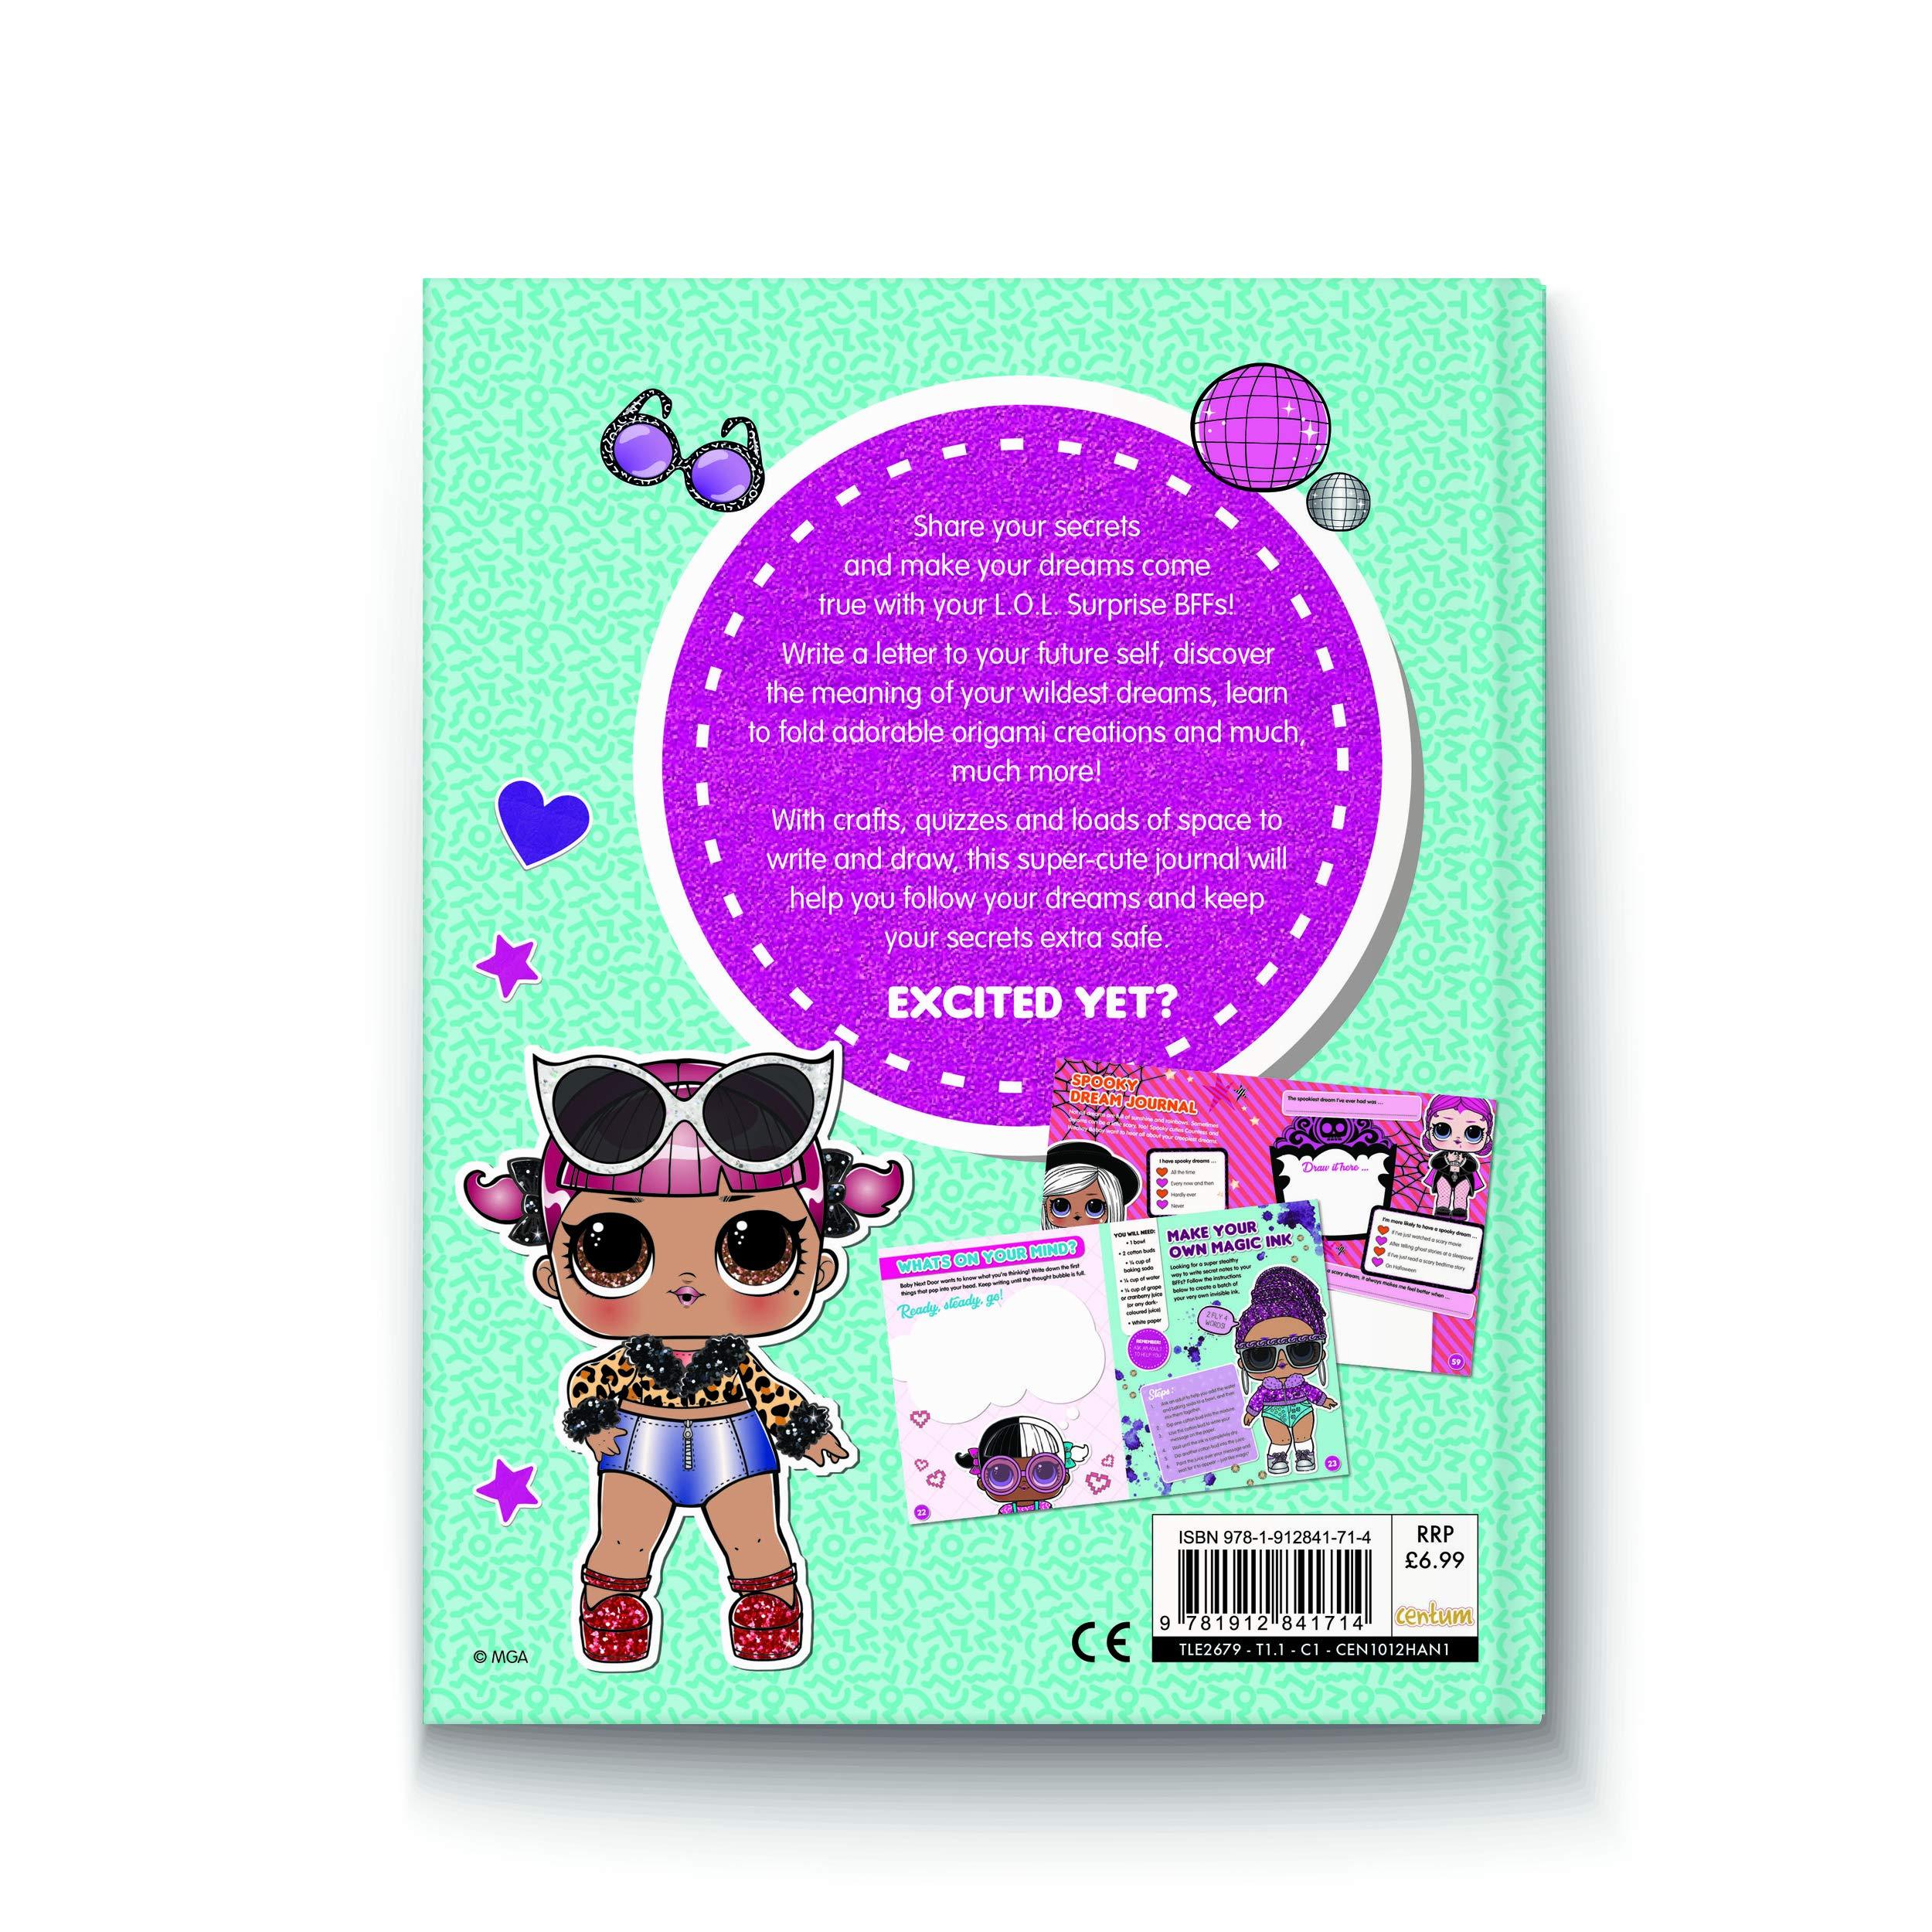 L.O.L. Surprise! Secrets and Dreams Journal - Ourkids - OKO